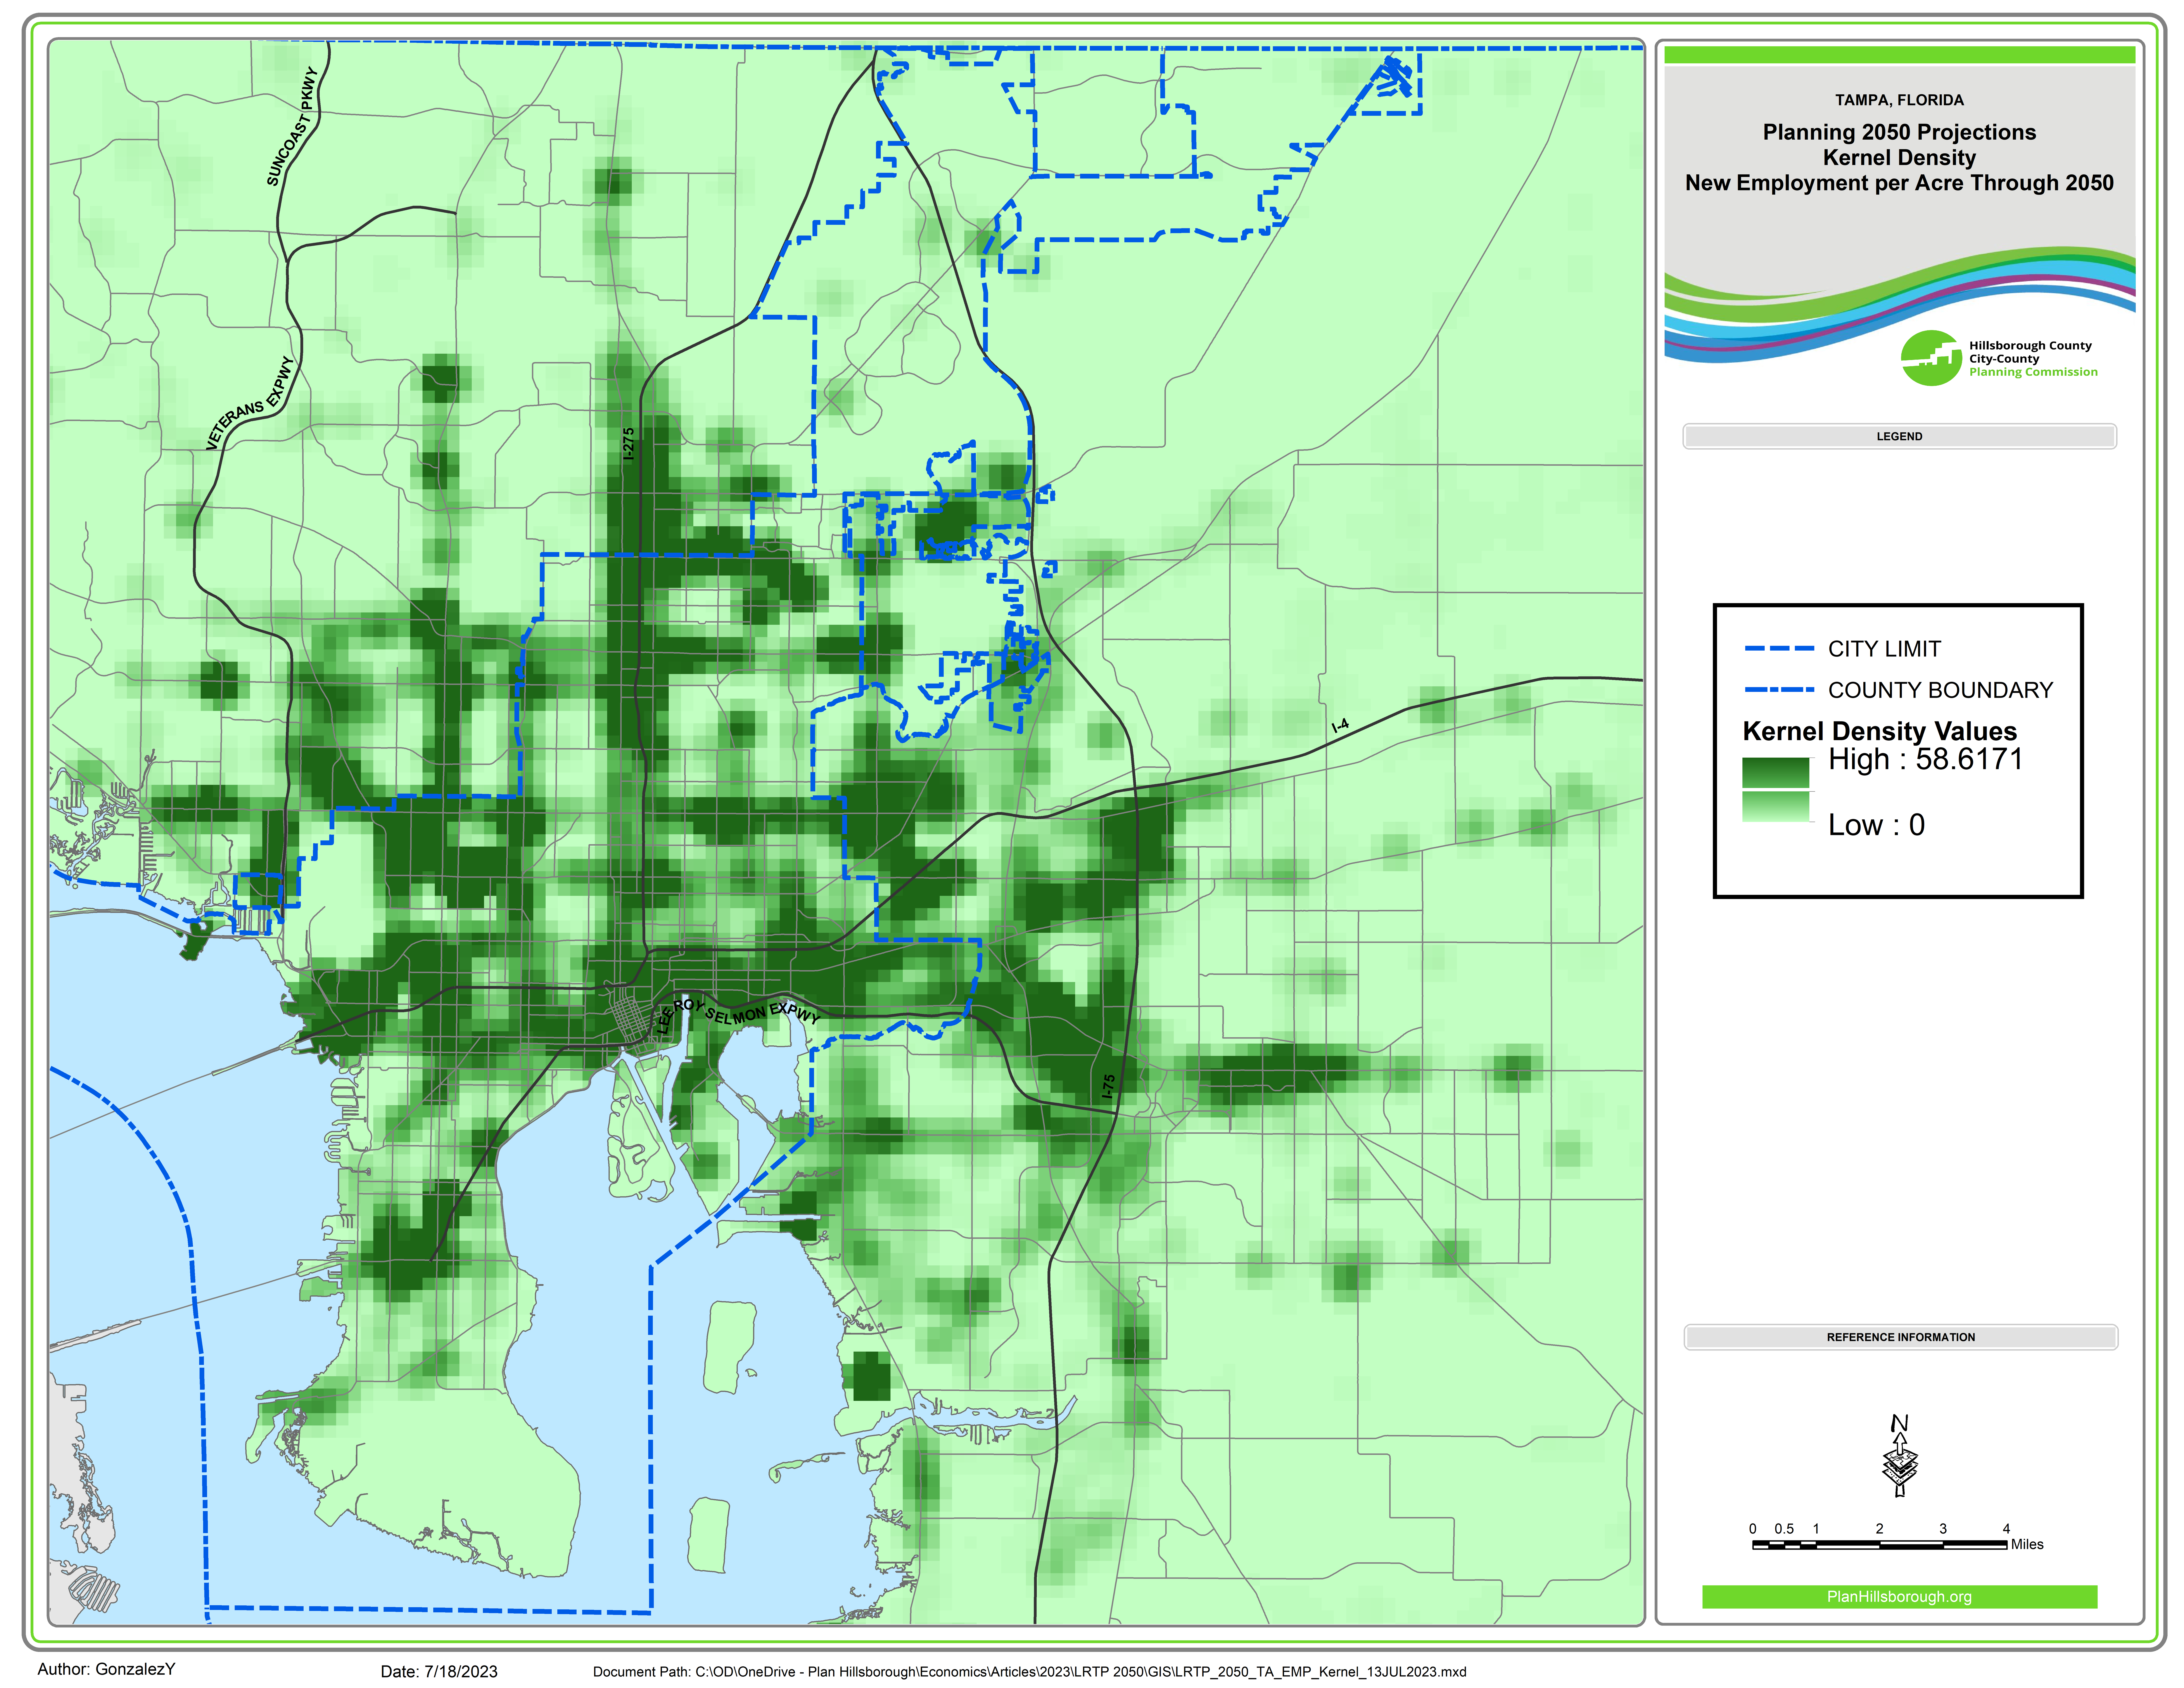 Map shows kernel density of new employment per acre through 2050 for the City of Tampa. Darker green areas indicate where most new jobs will be located.